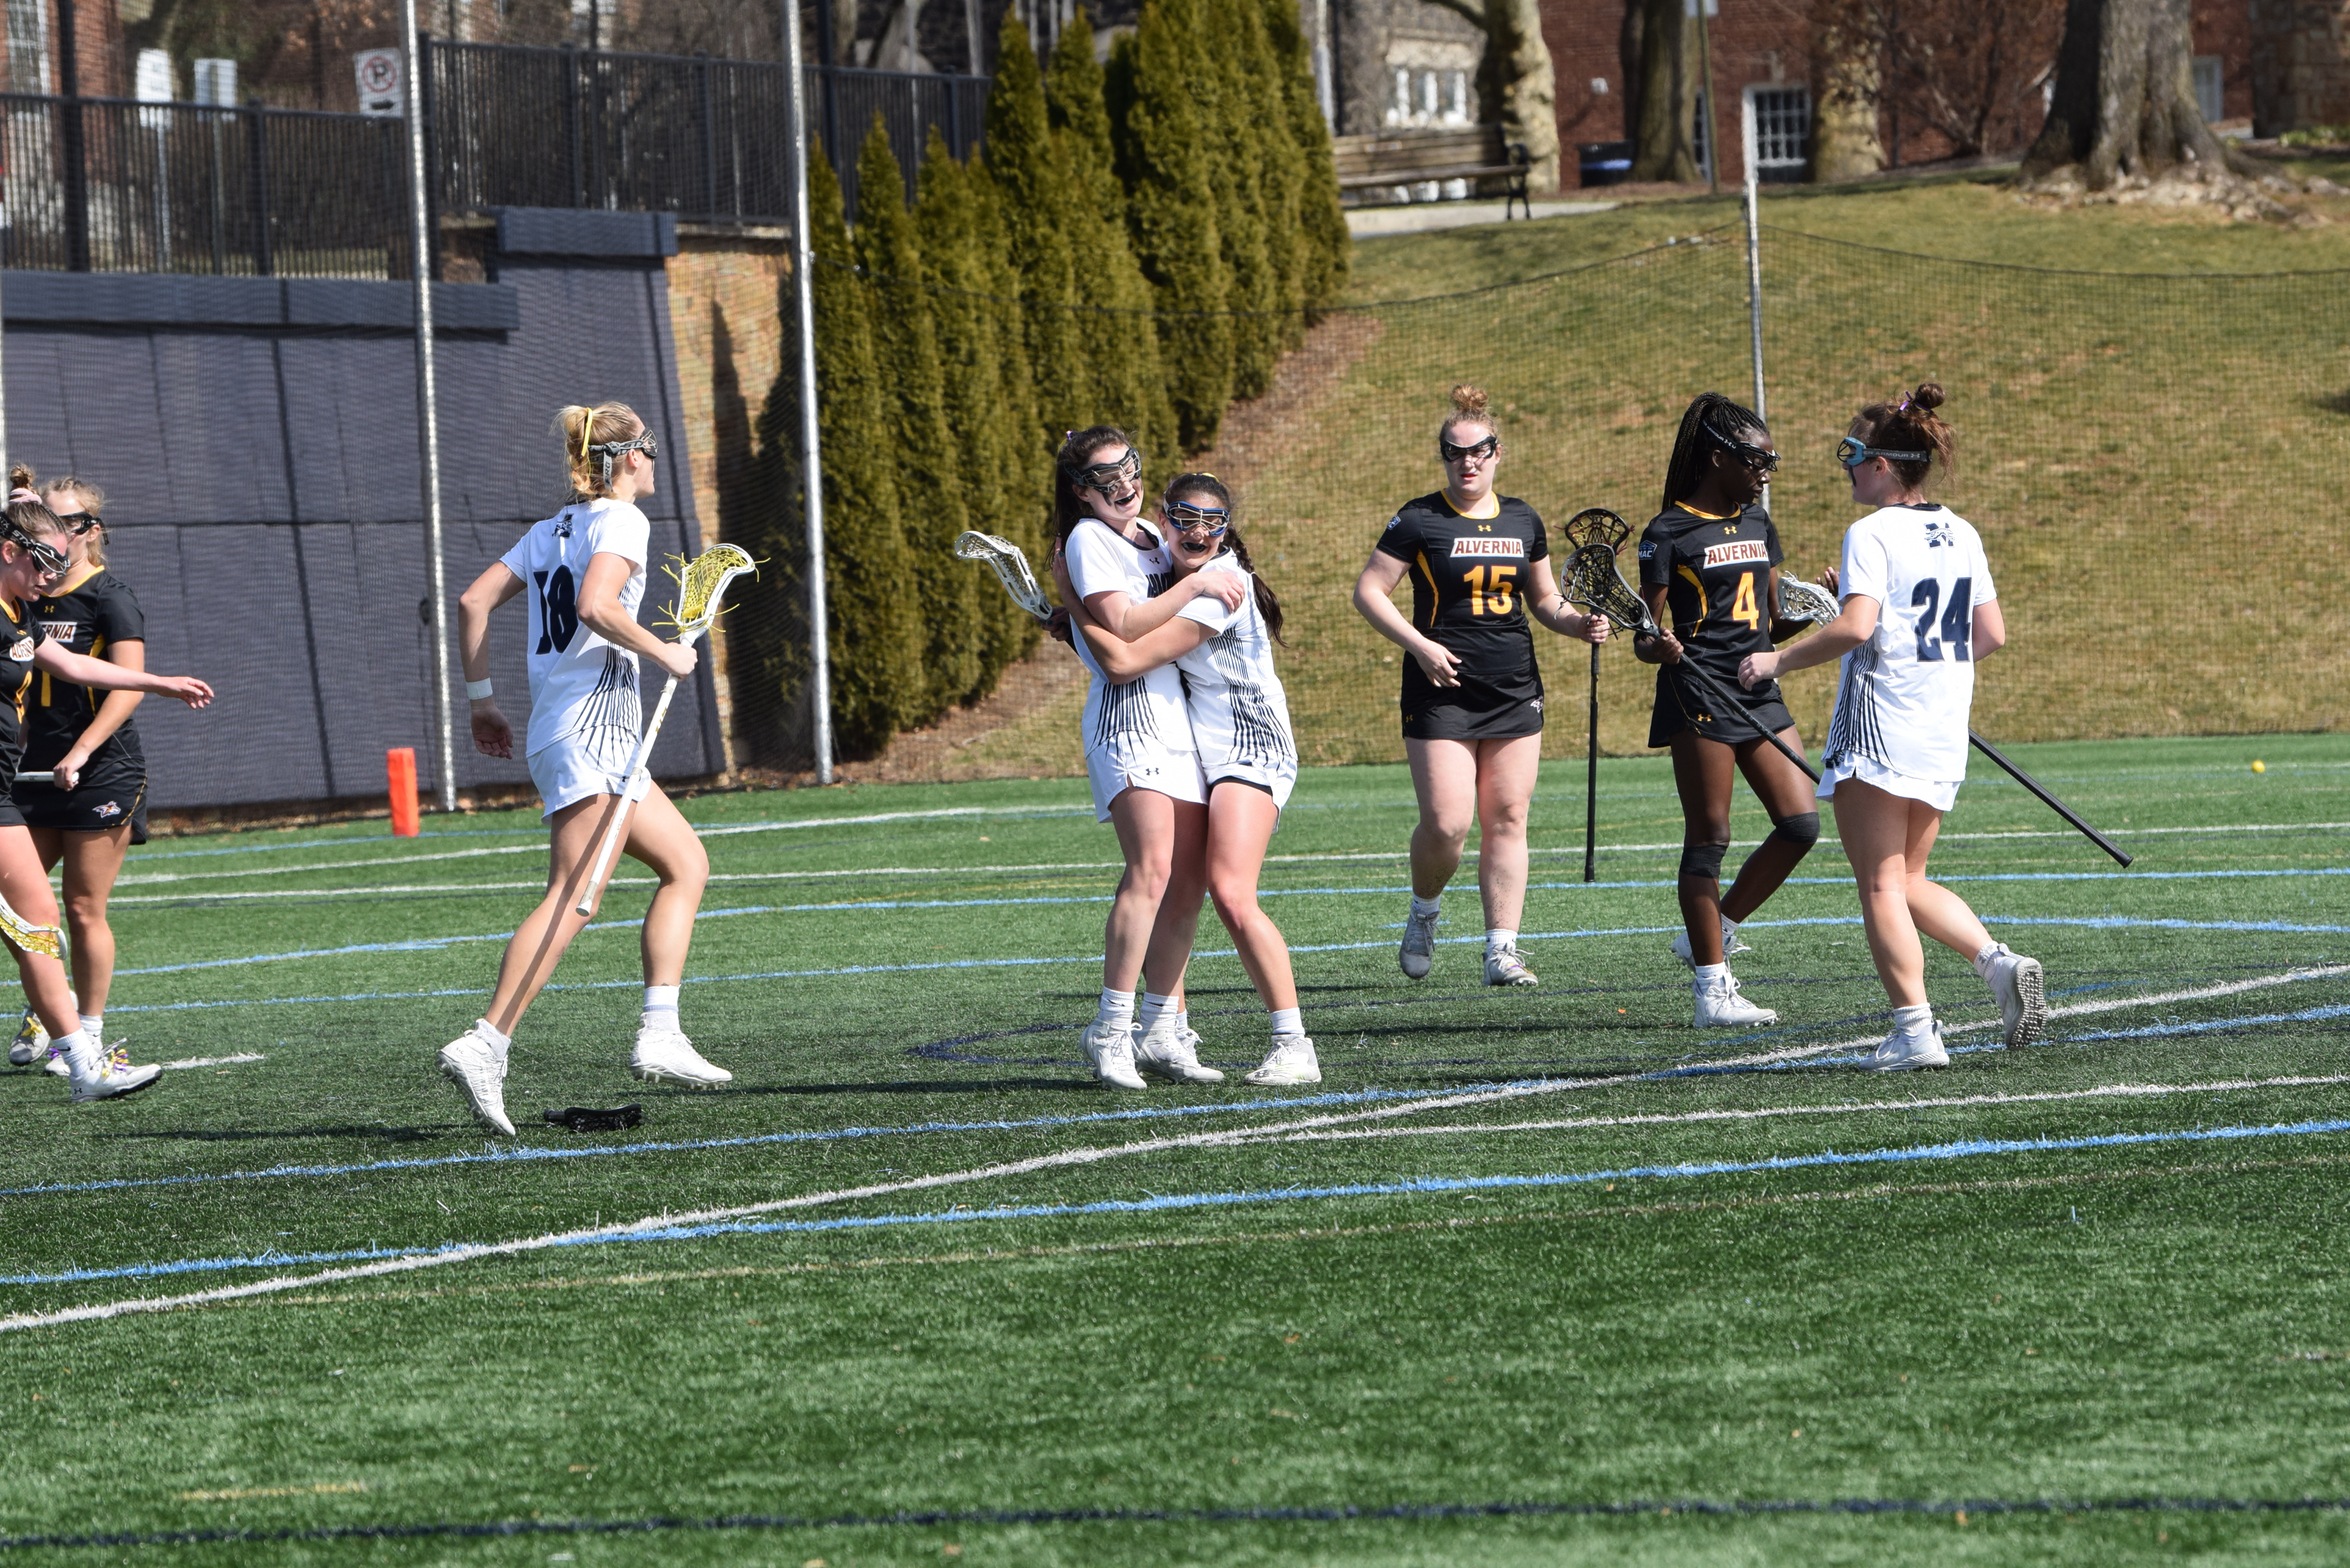 The Greyhounds celebrate sophomore attack Jackie Salvatore's 100th career point on a goal in the first half versus Alvernia University on John Makuvek Field. Photo by Marissa Williams '26